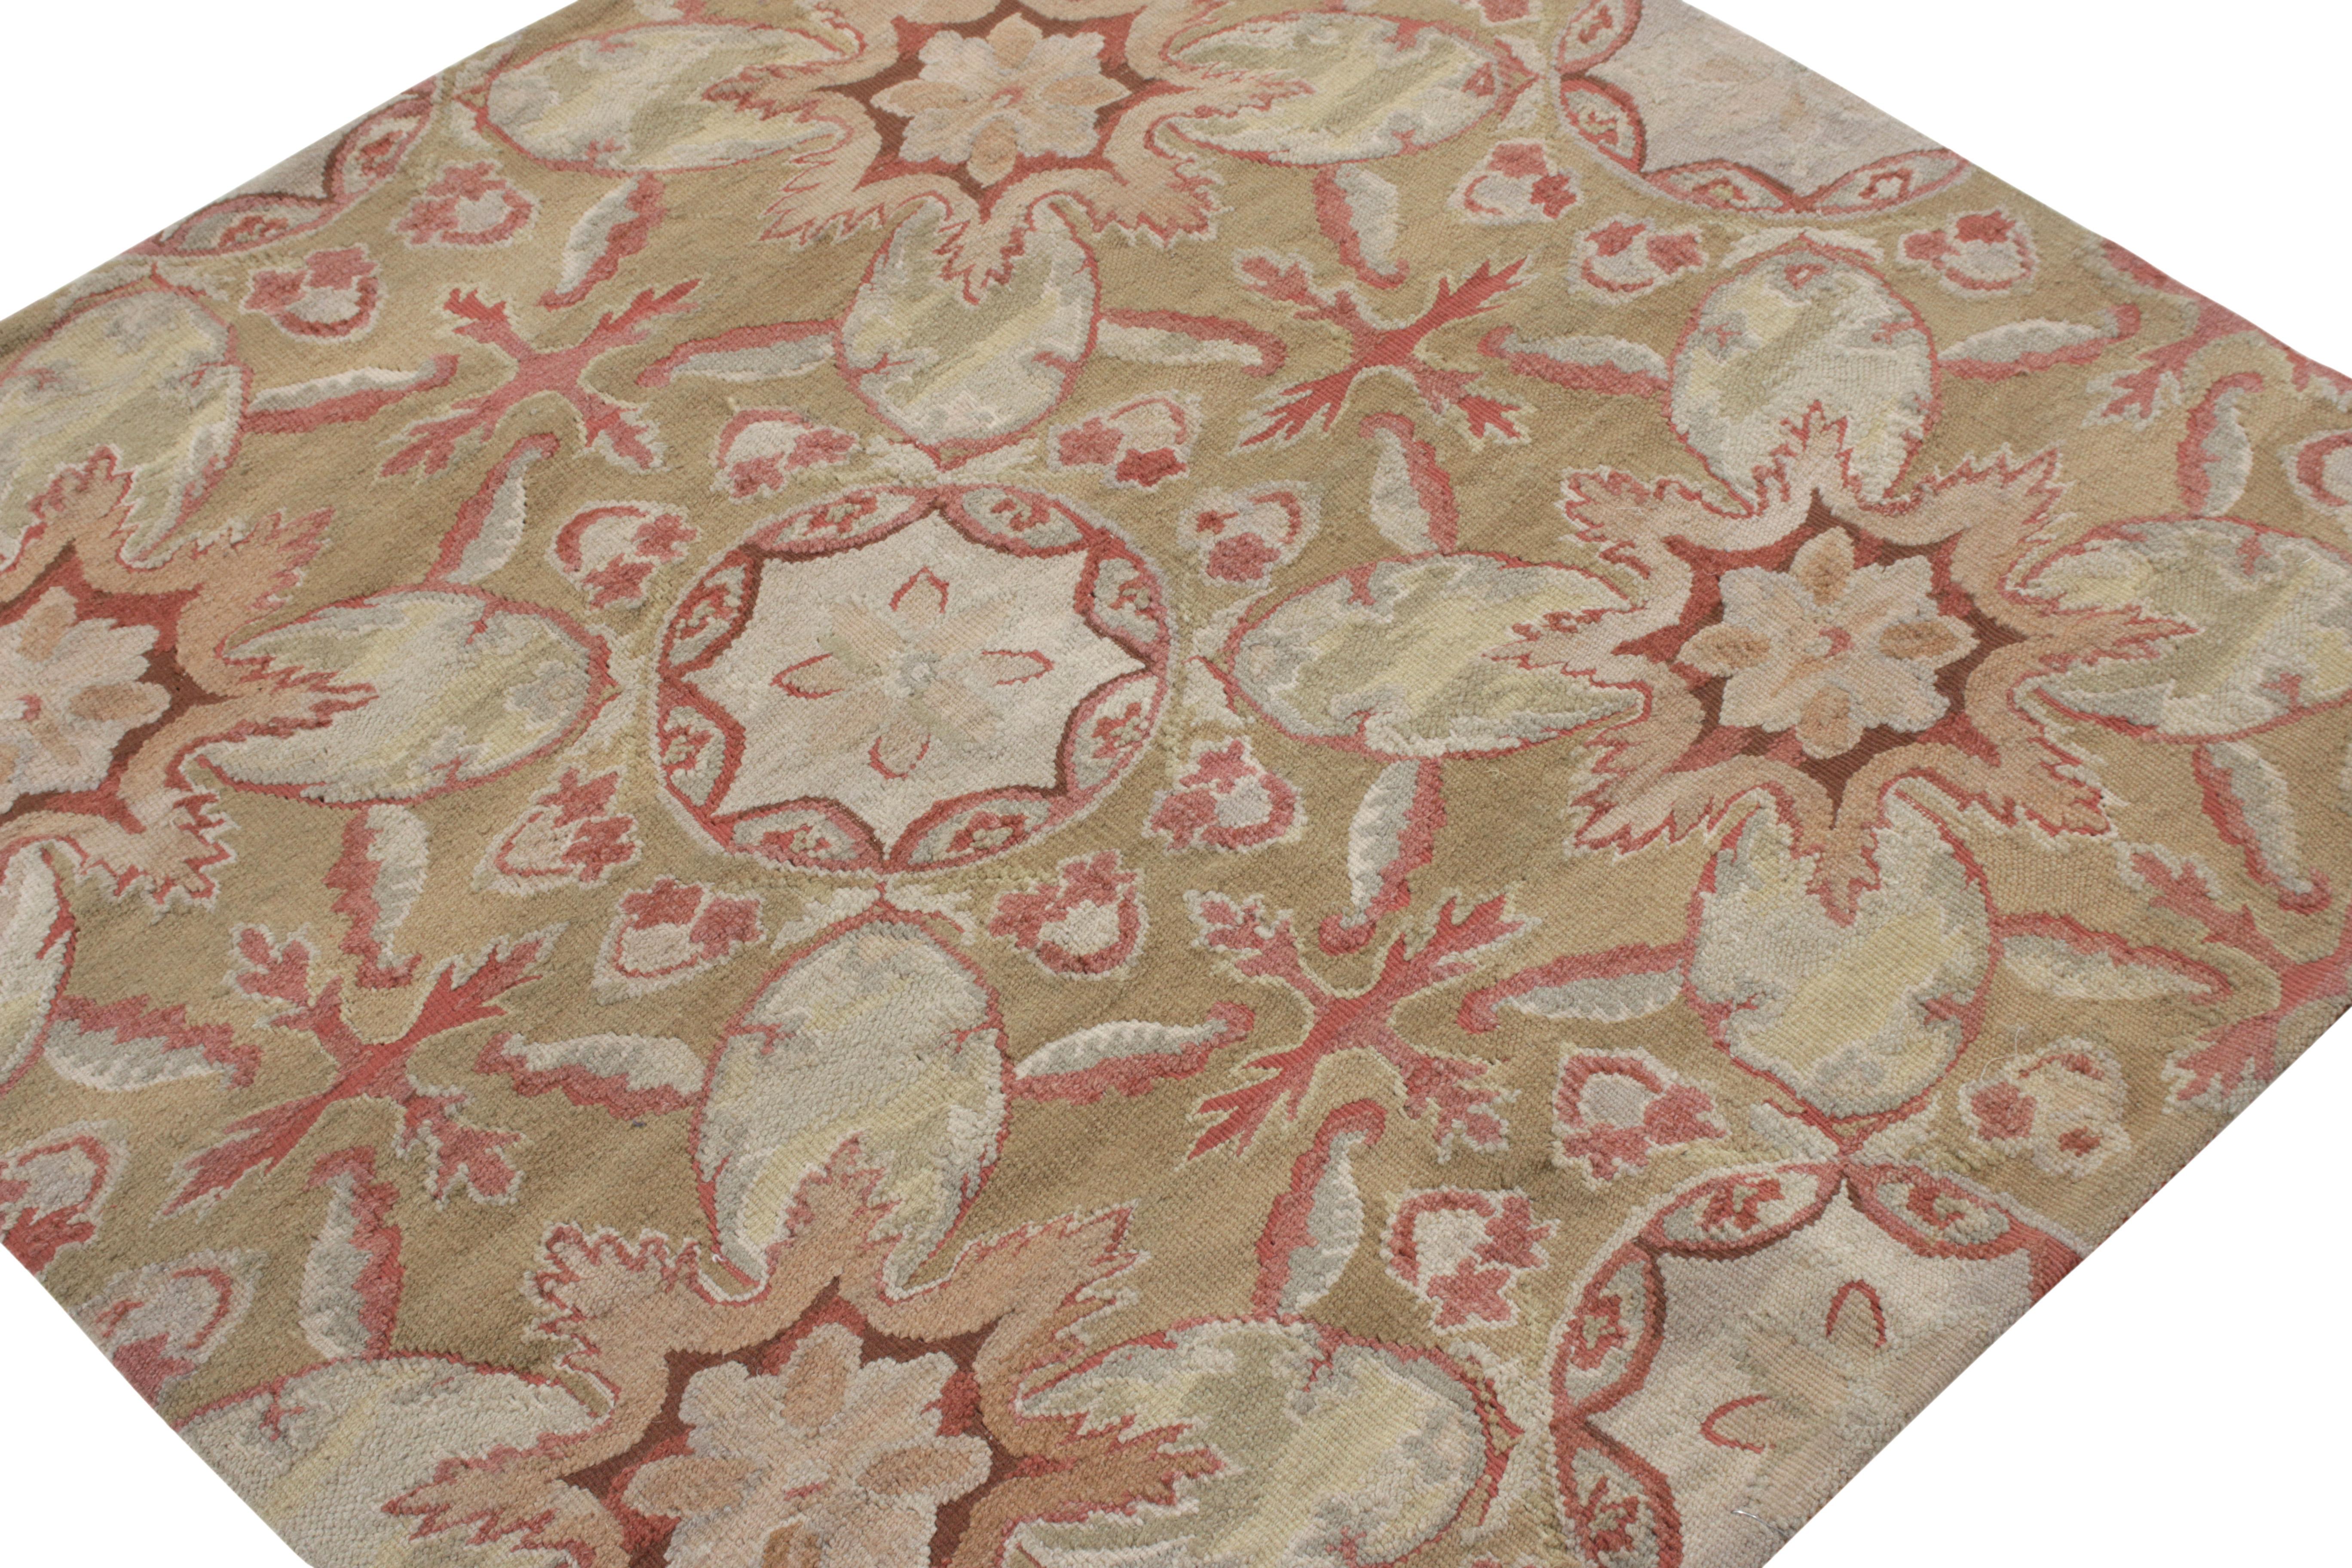 Chinese Rug & Kilim’s Aubusson Flat Weave Style Rug, Beige-Brown, Pink Floral Pattern For Sale